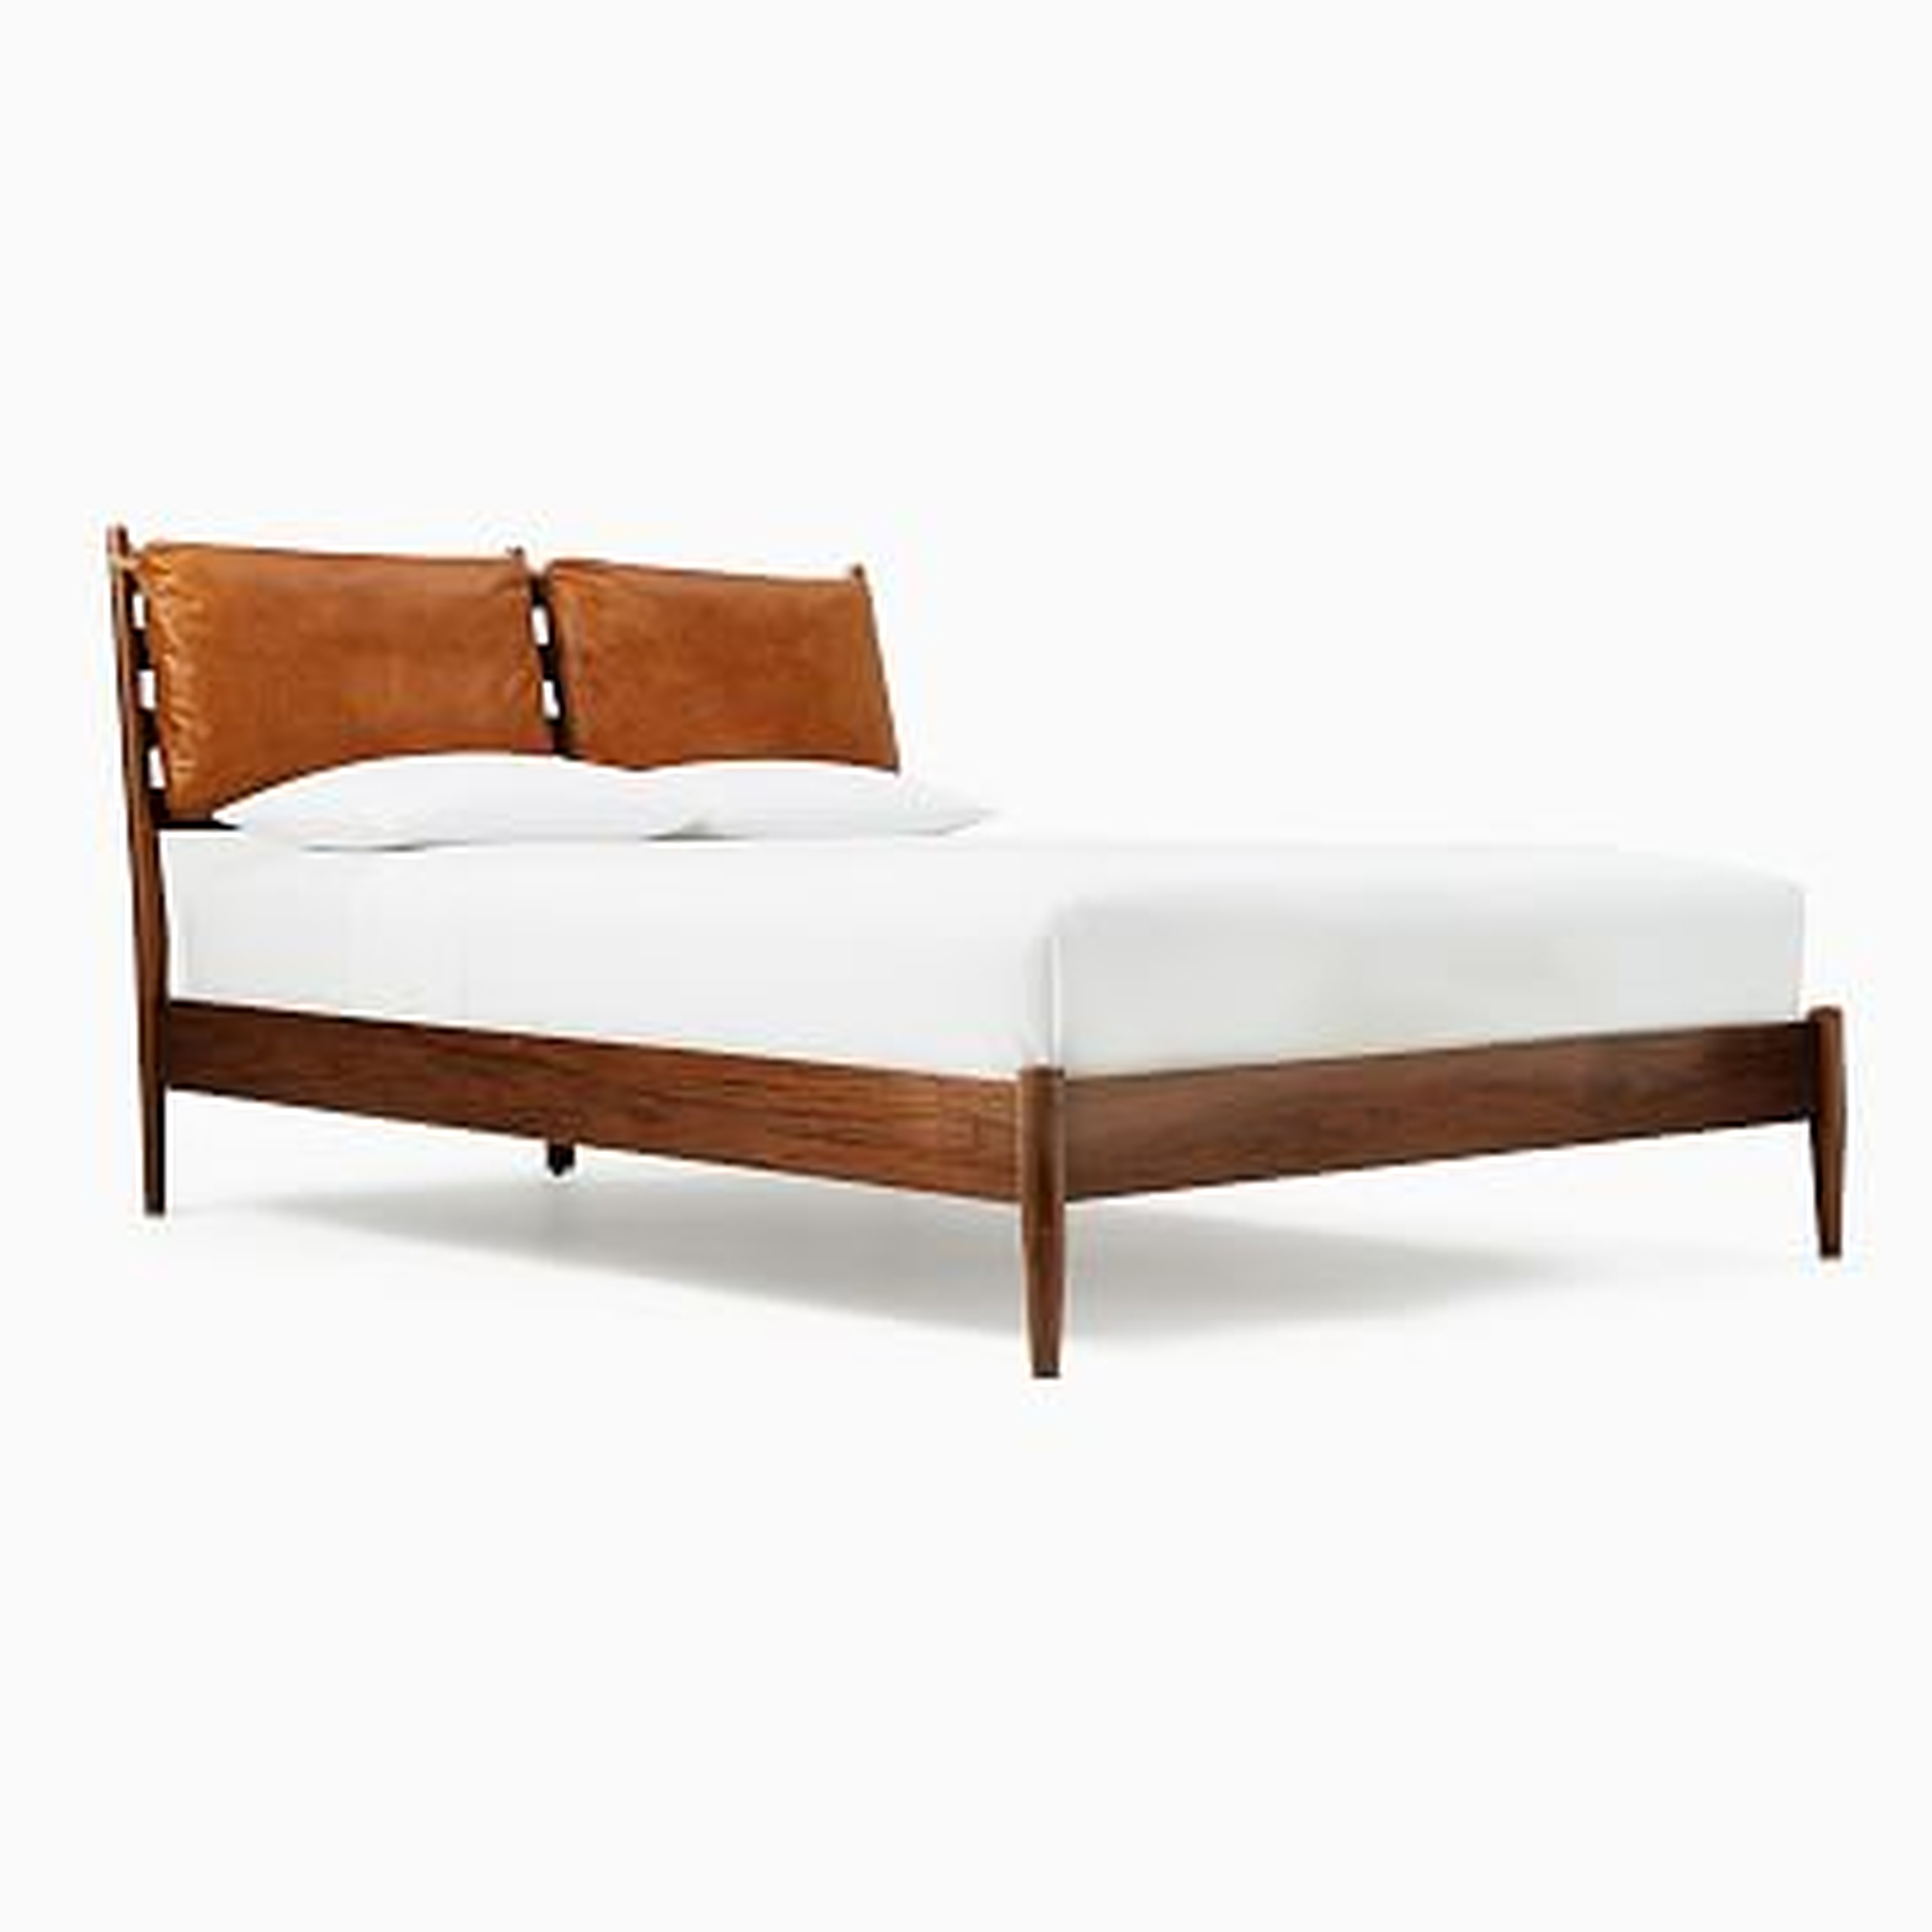 NO LONGER AVAILABLE Arne Bed+ Leather Cushion- Queen, Walnut - West Elm